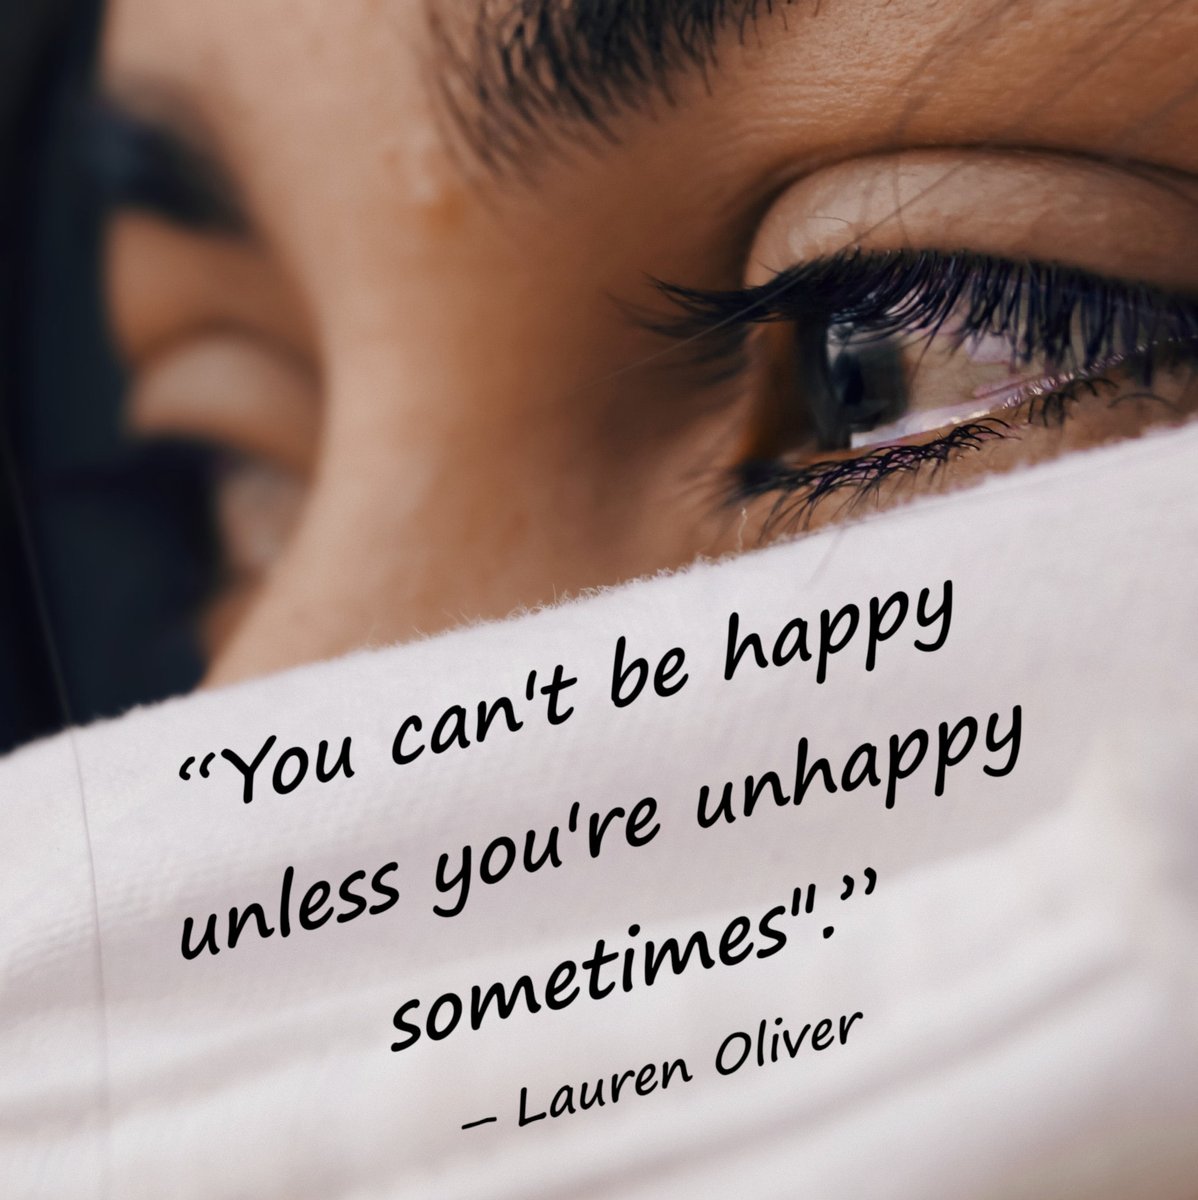 If you have never been #unhappy, how do you know that you are #happy?⁠
⁠⁠
#sadquotes #sadface #sadquotespage #sadnessquote  #happinessquotes